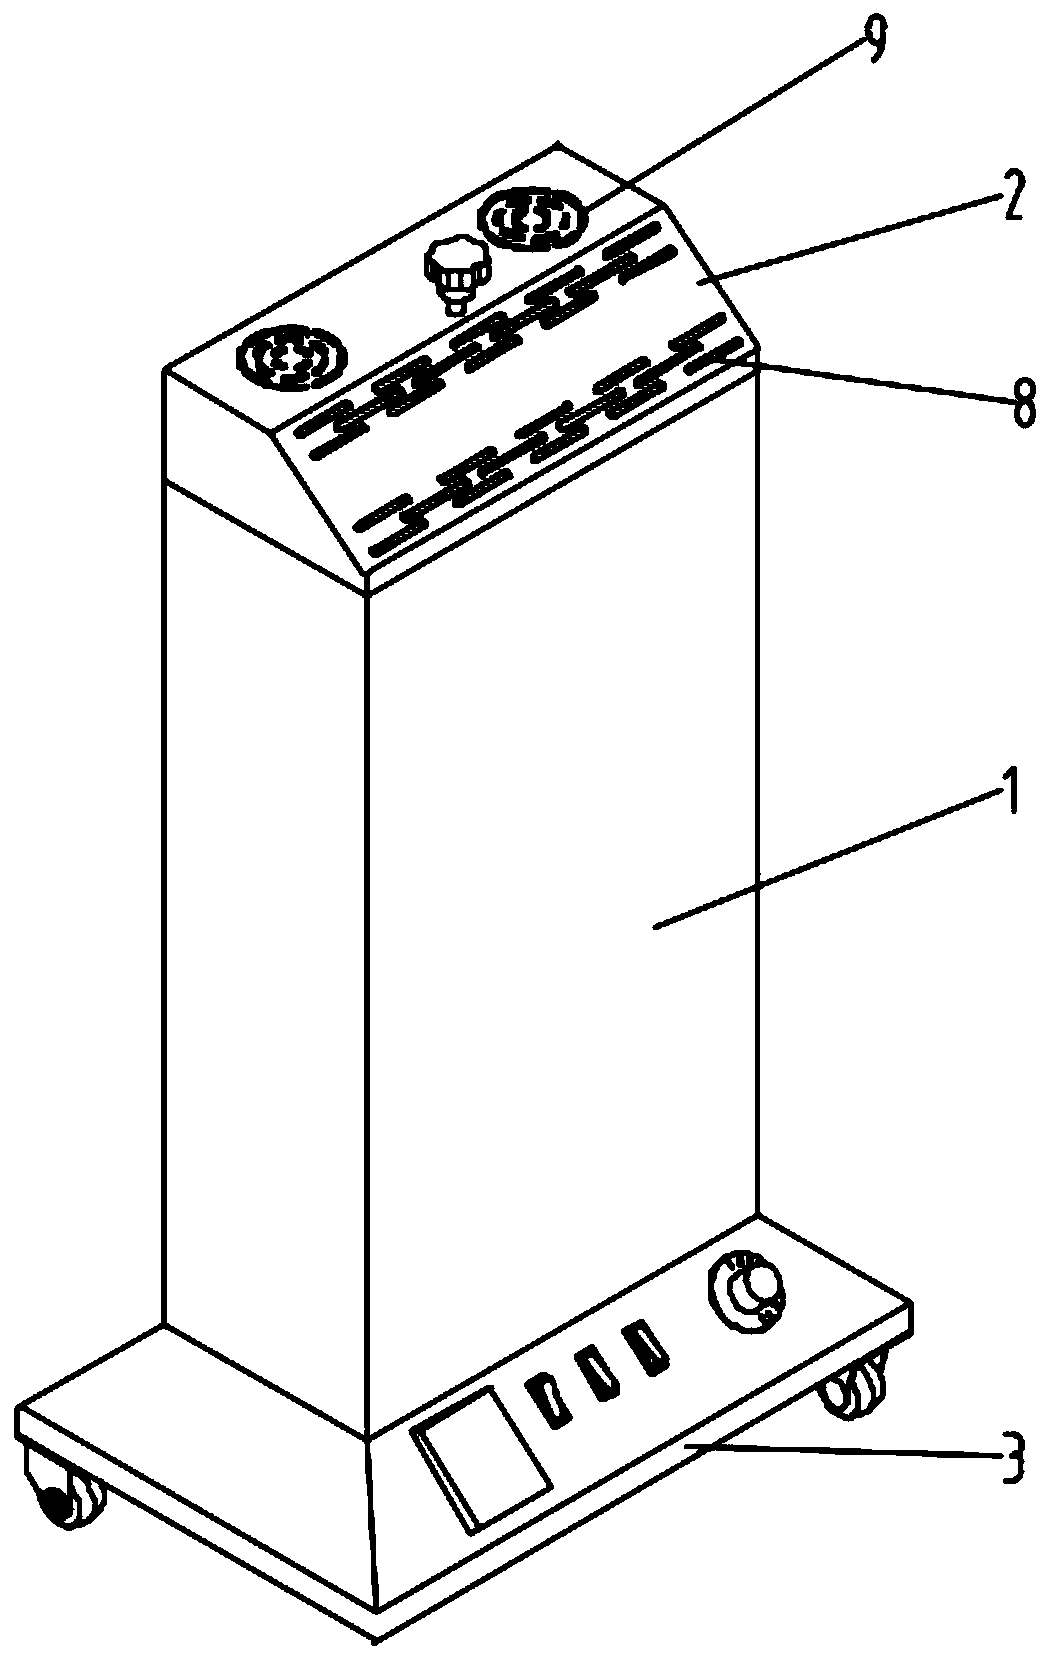 Heat accumulating type electric heater with heat accumulator formed by casting